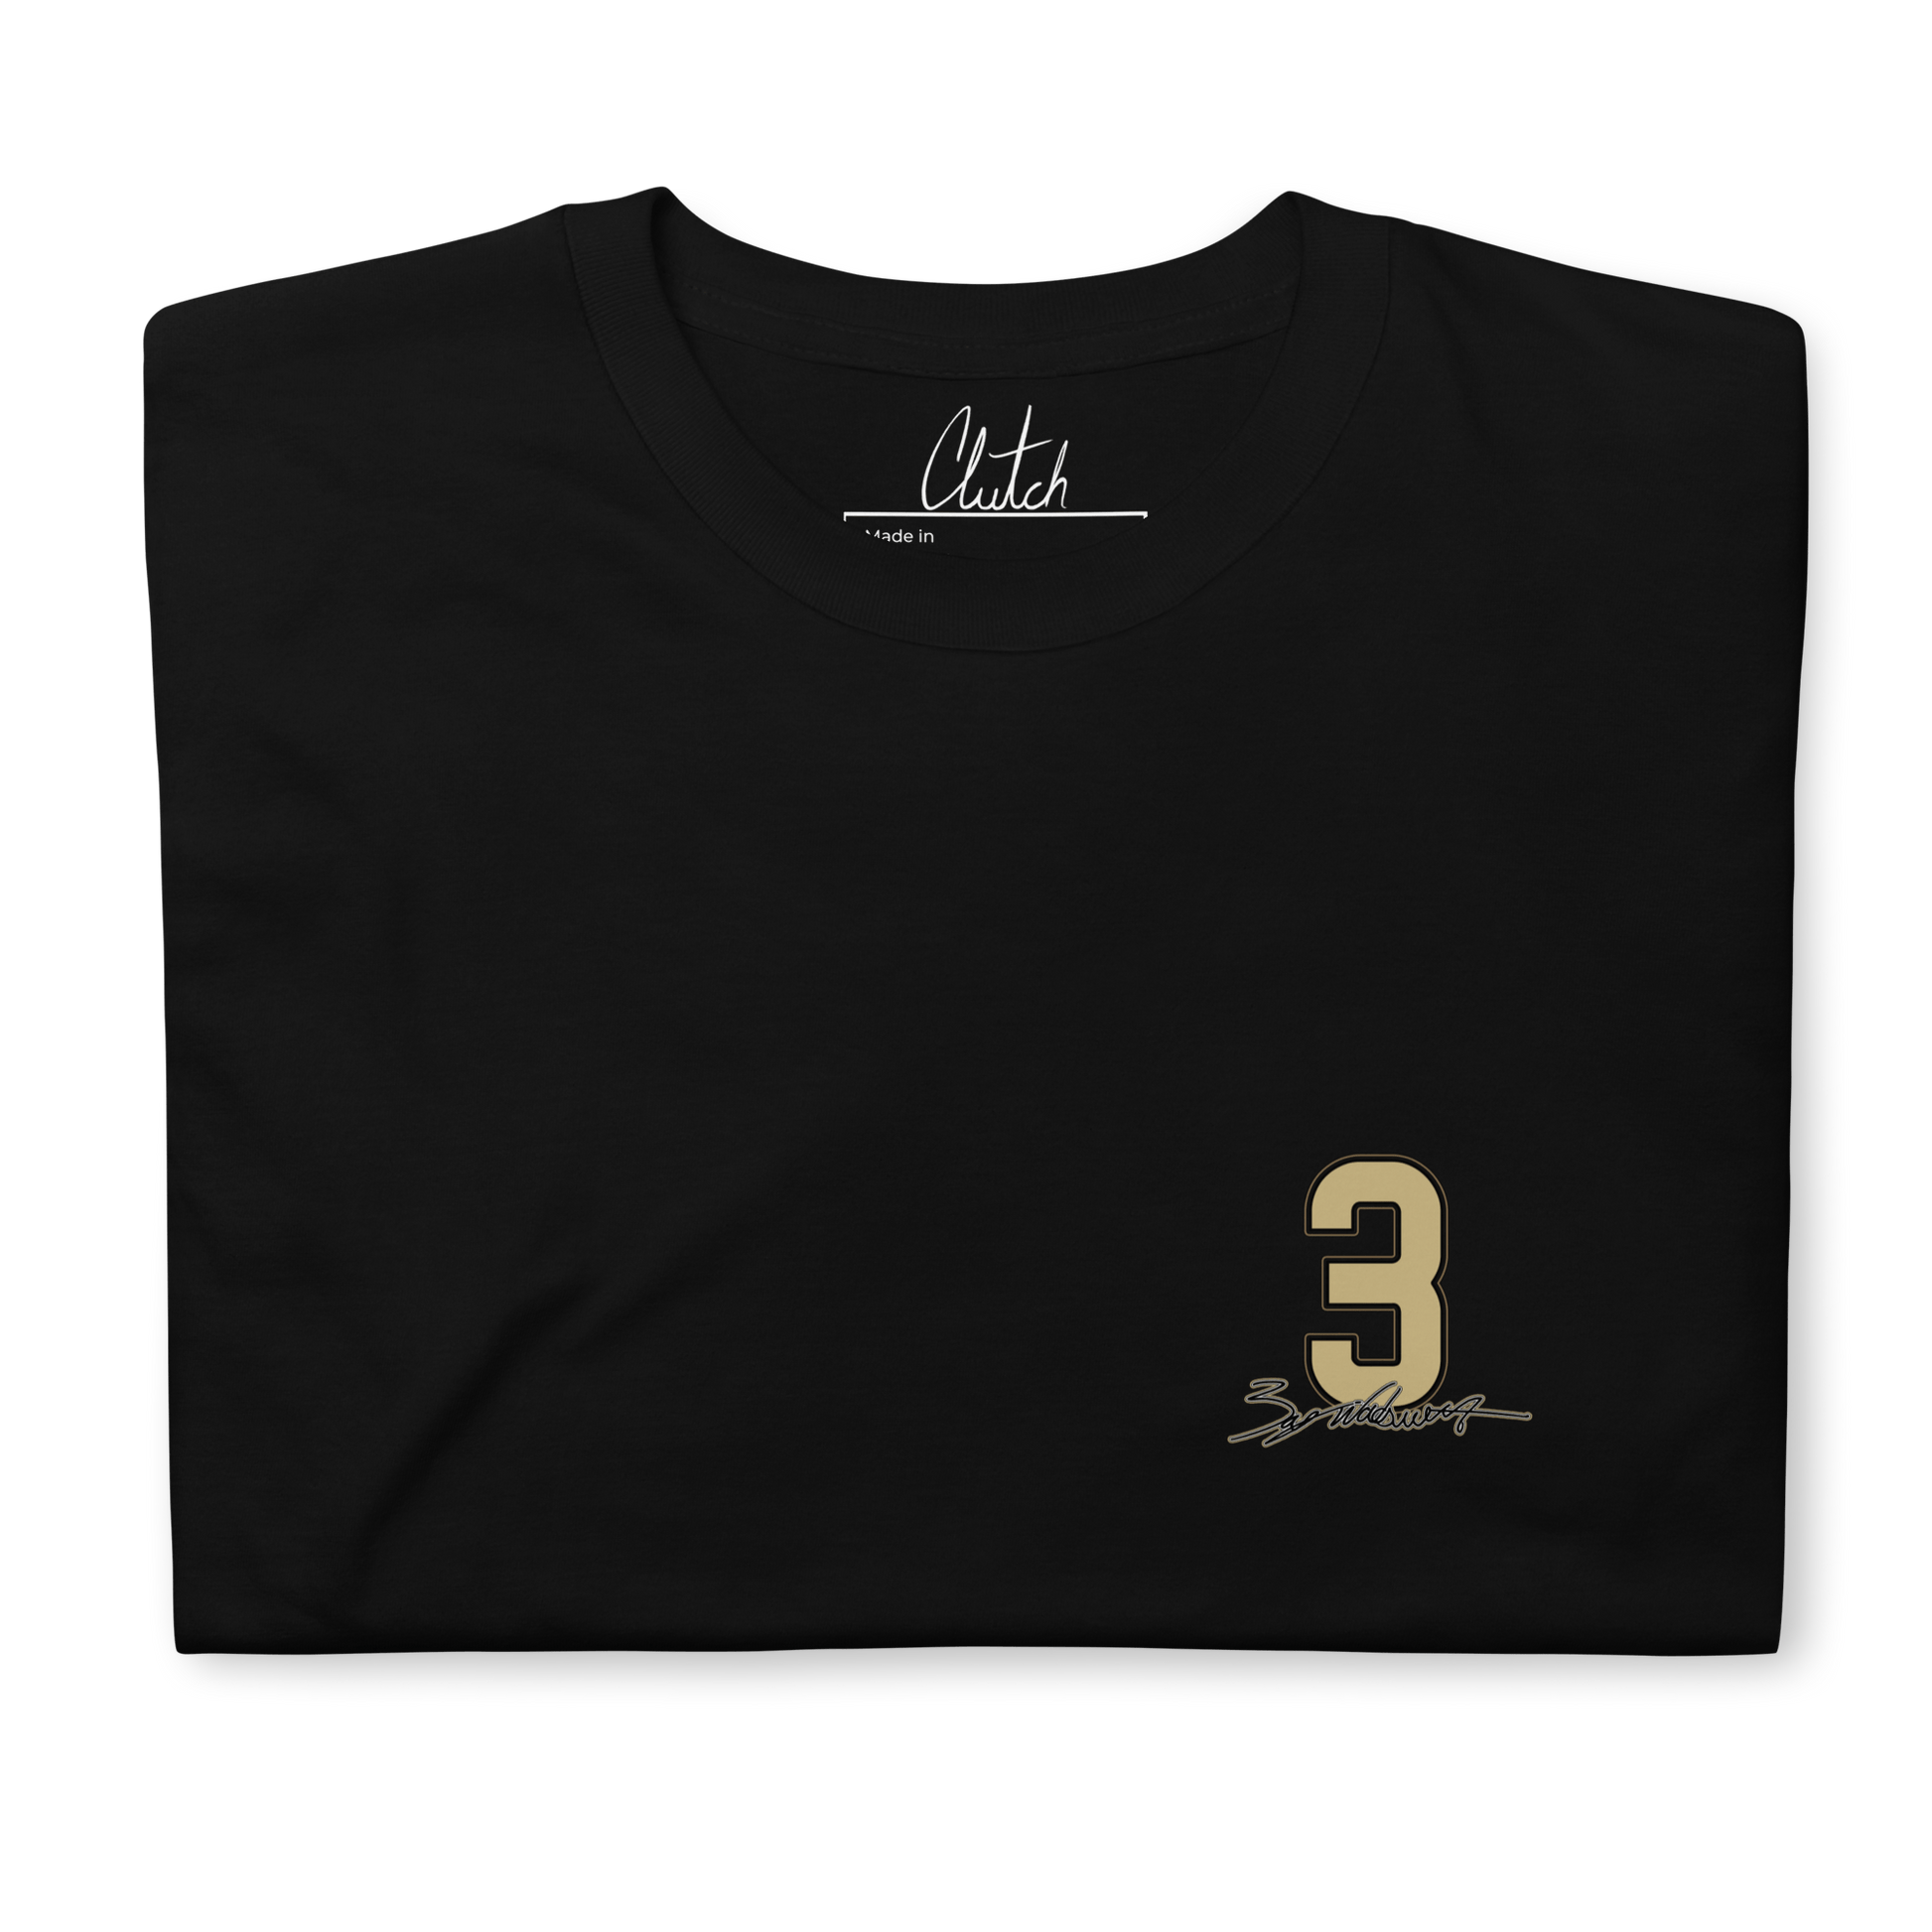 Isaiah Wadsworth | Player Patch T-shirt - Clutch -